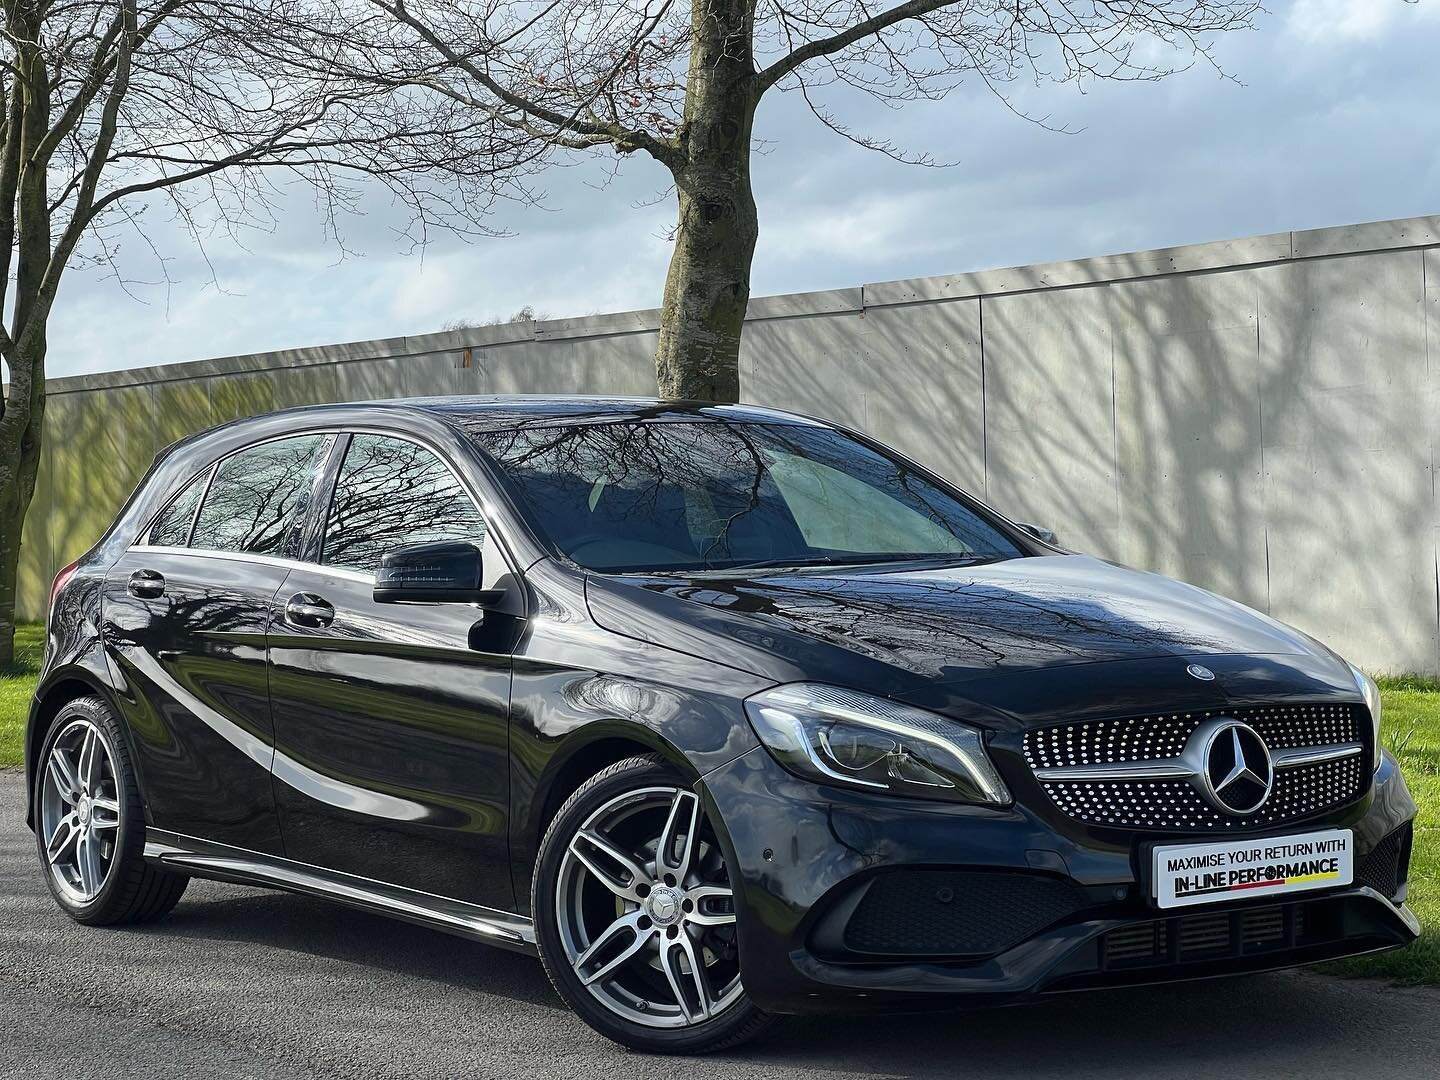 Here At IN-LINE PERFORMANCE We Take Pride And Joy Into Supplying You With The Very Best Of German Engineering.
We Are Proud To Present To You This 2017  Mercedes Benz Premium A220D A Class Finished In Metallic Black With AMG  Black Leather Interior .